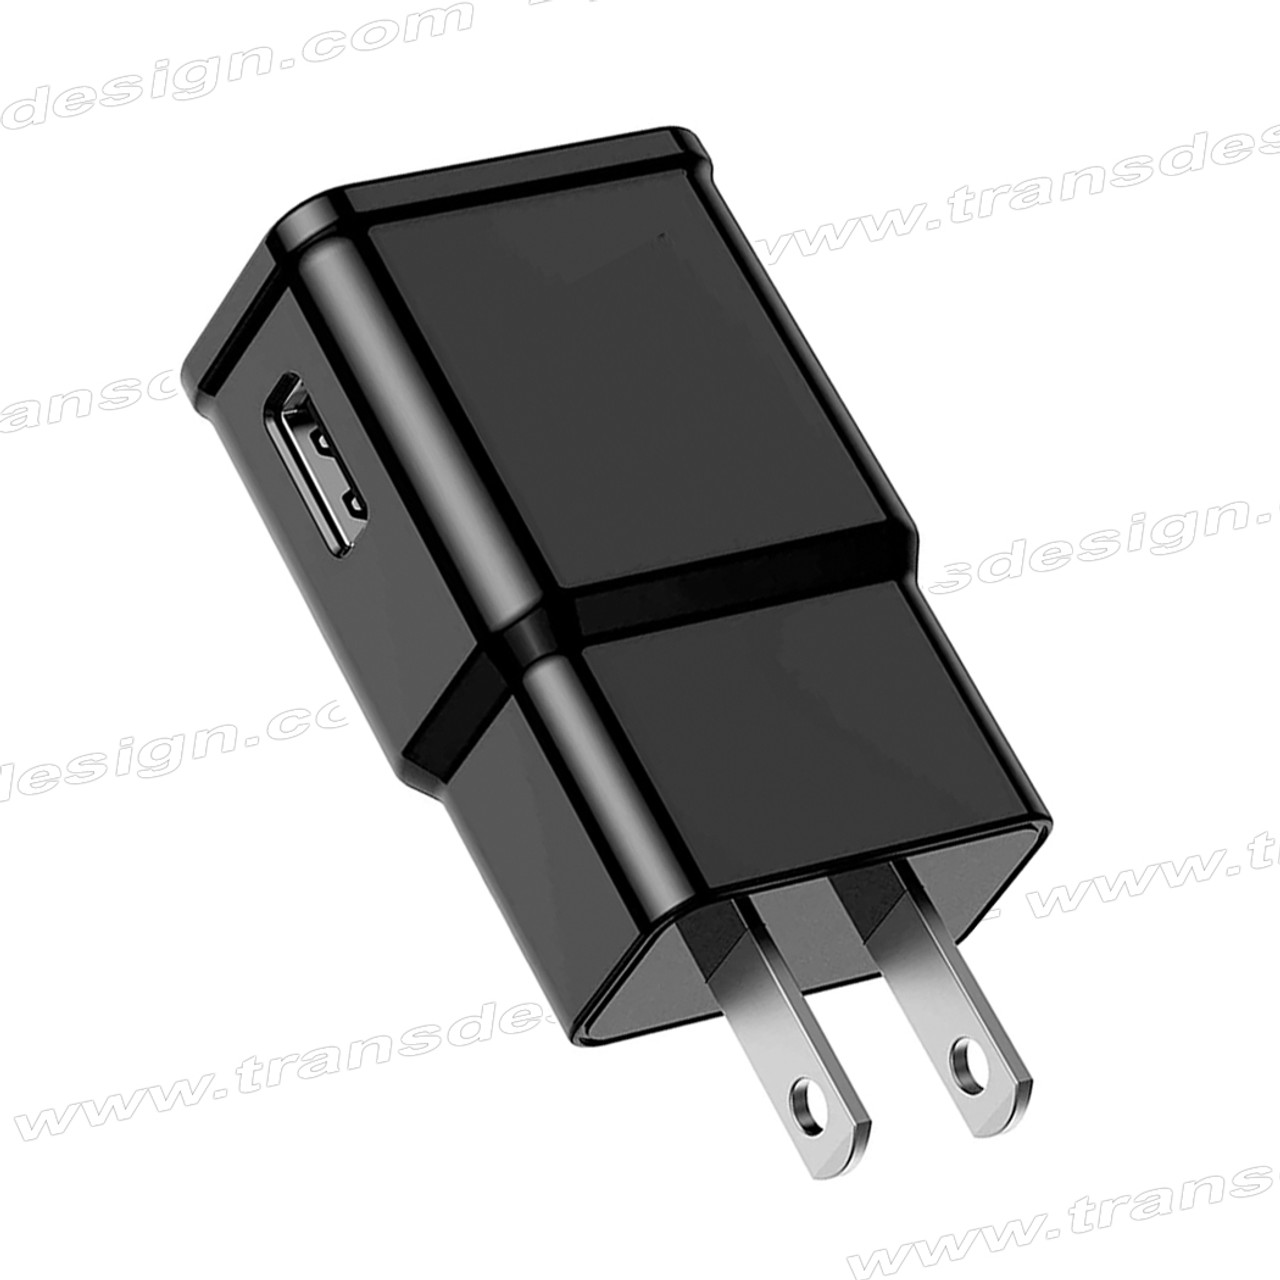 POWER ADAPTER 100-240VAC to USB 5VDC 2A